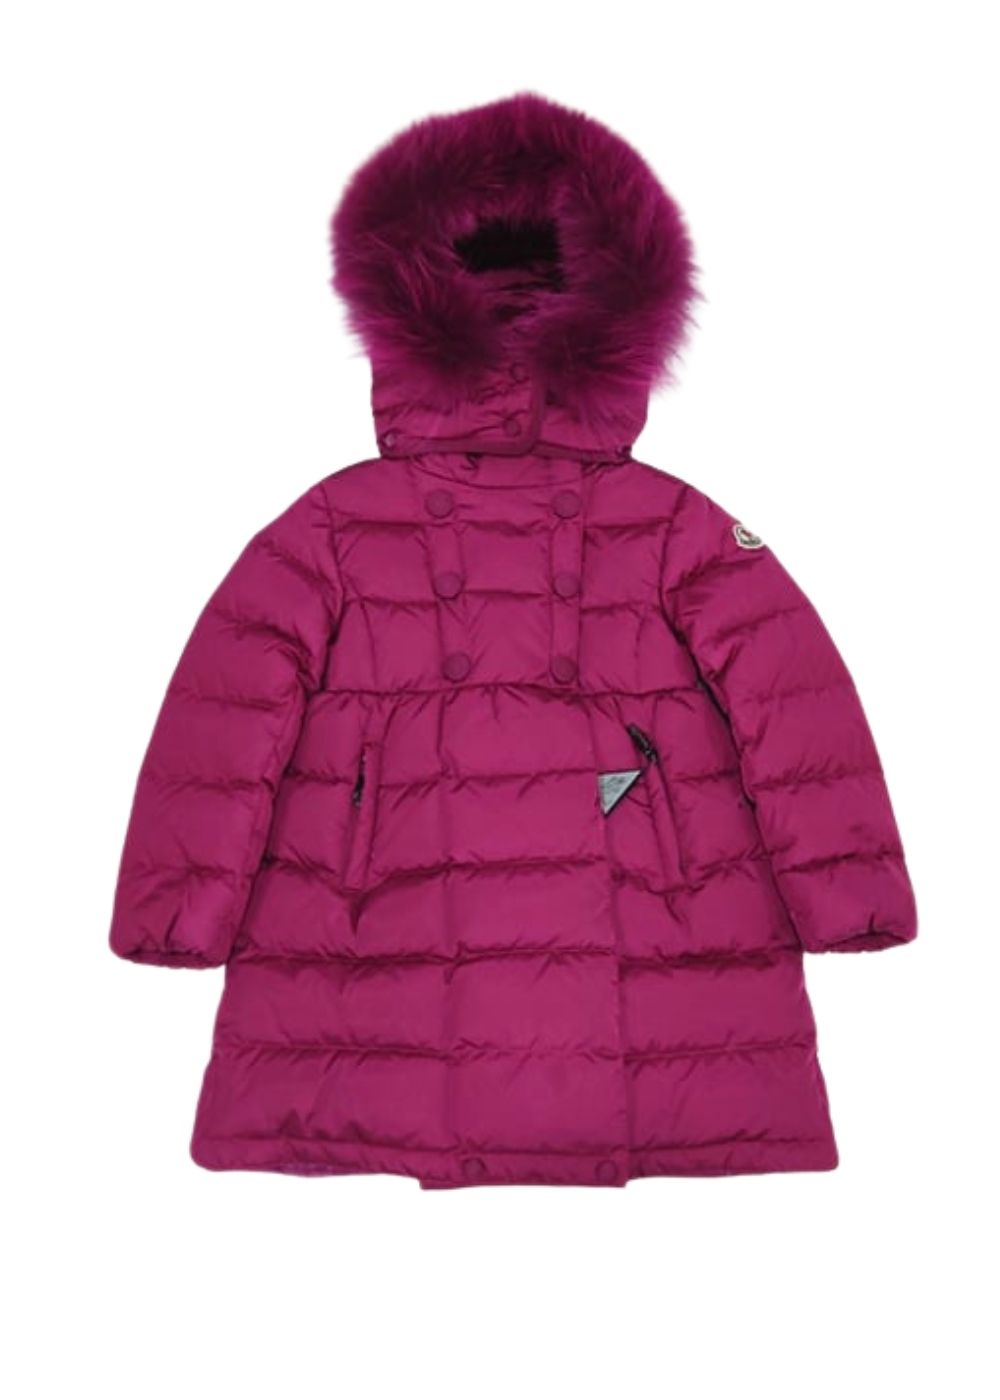 Featured image for “MONCLER PIUMINO FUCSIA”